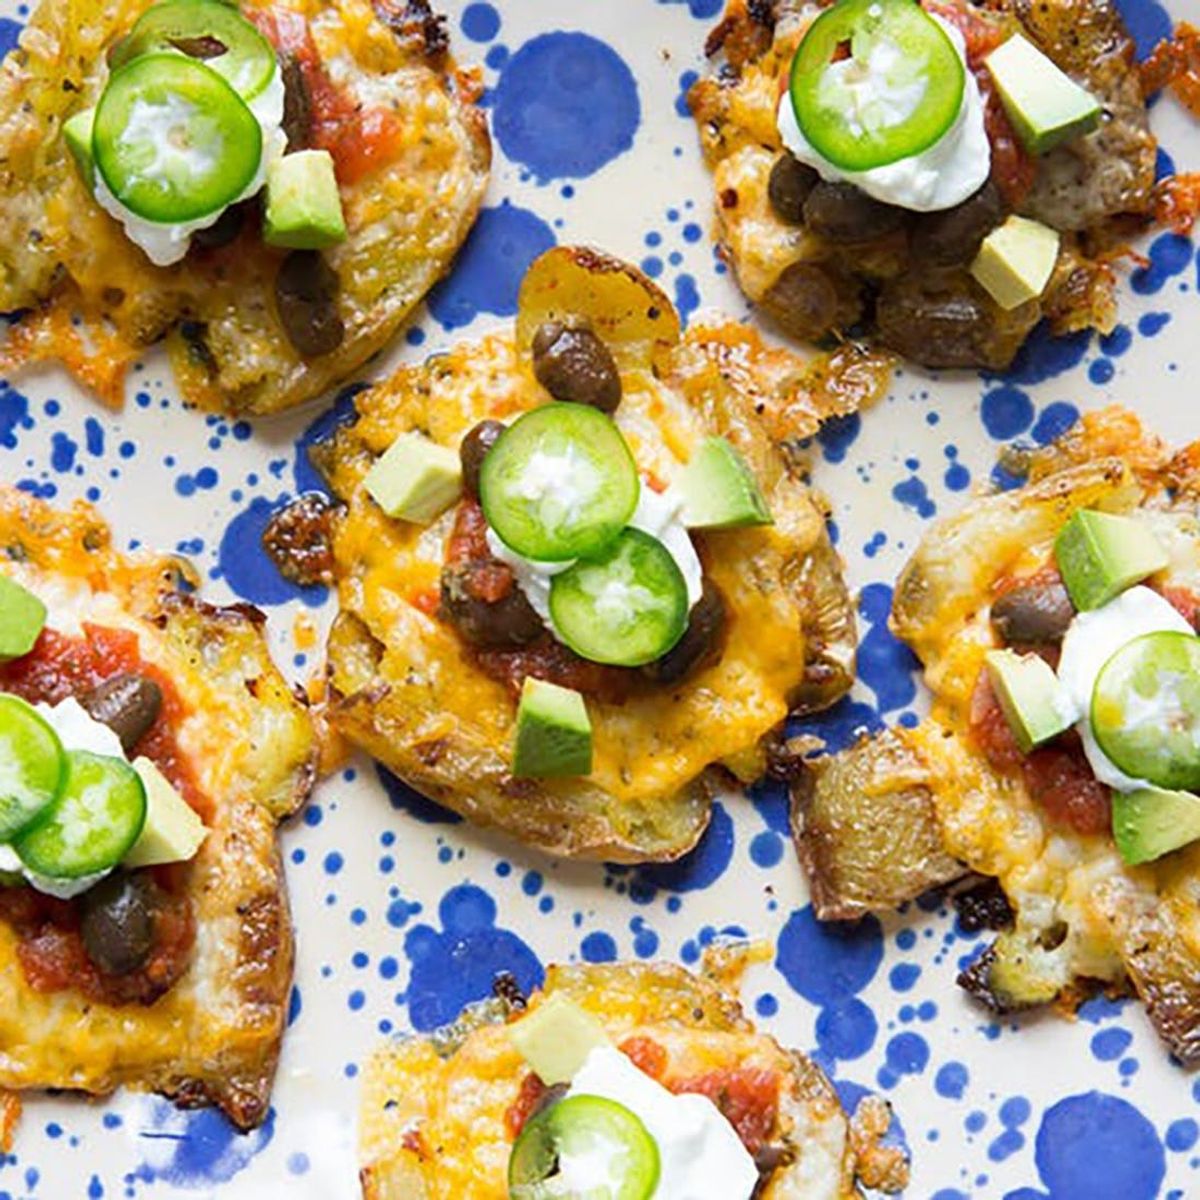 13 Easy Tex-Mex Recipes That Will Spice Up Your Weeknights